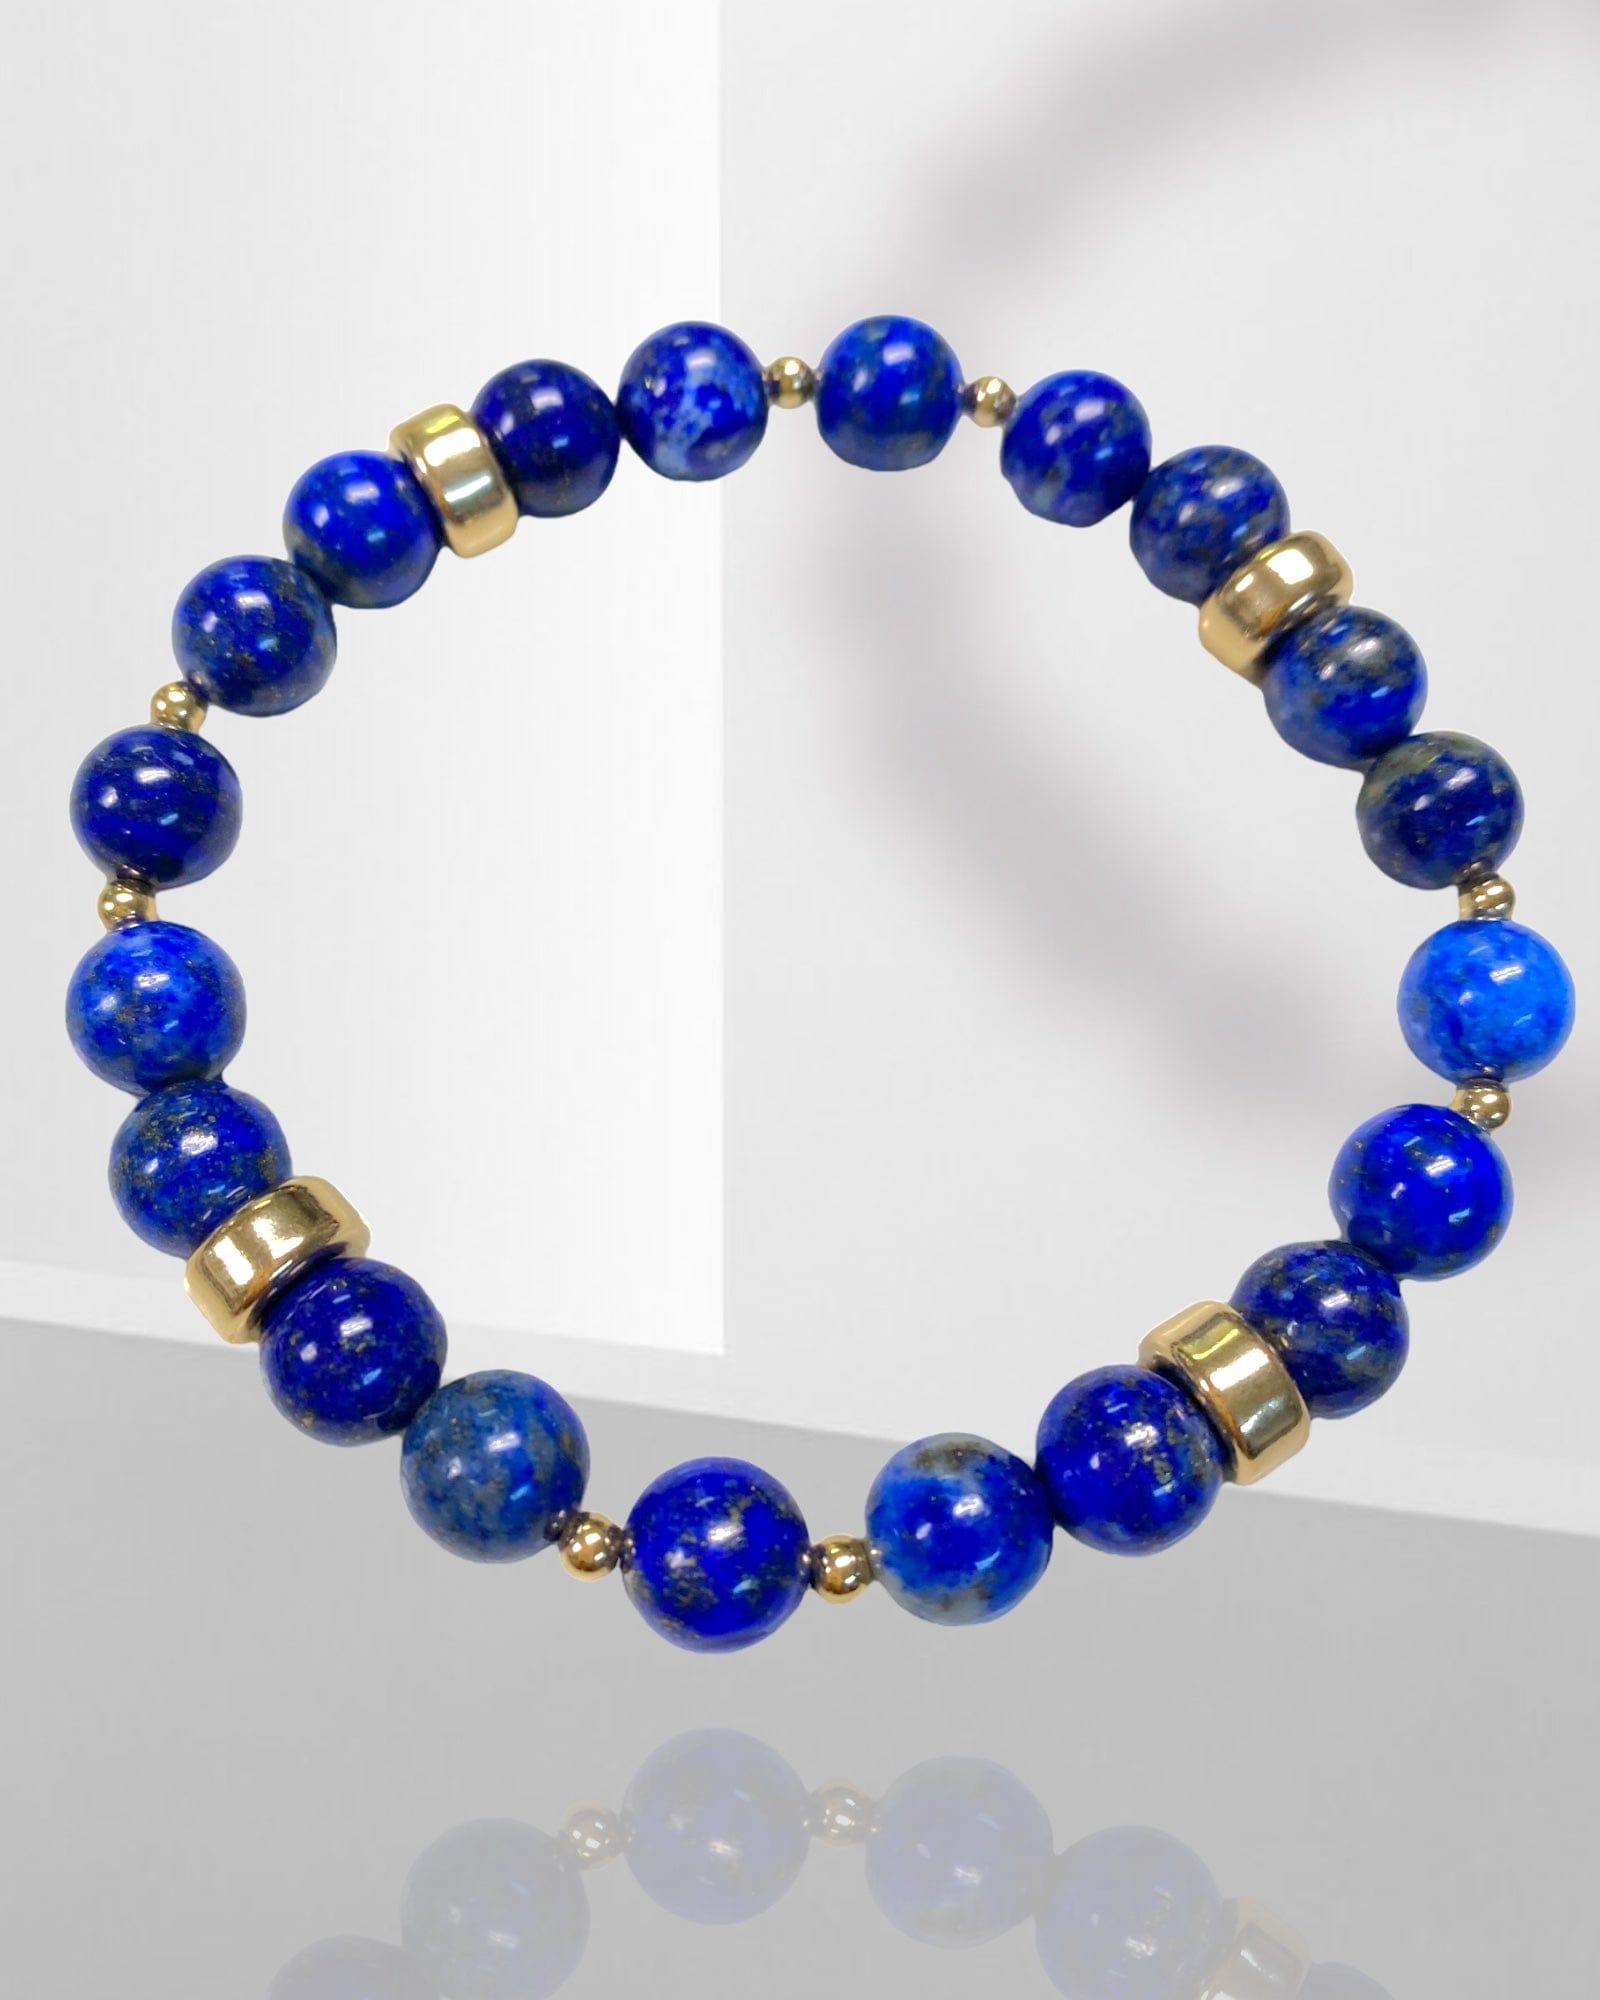 Lapis and gold gemstone bracelet - jewelry making kit - Too Cute Beads